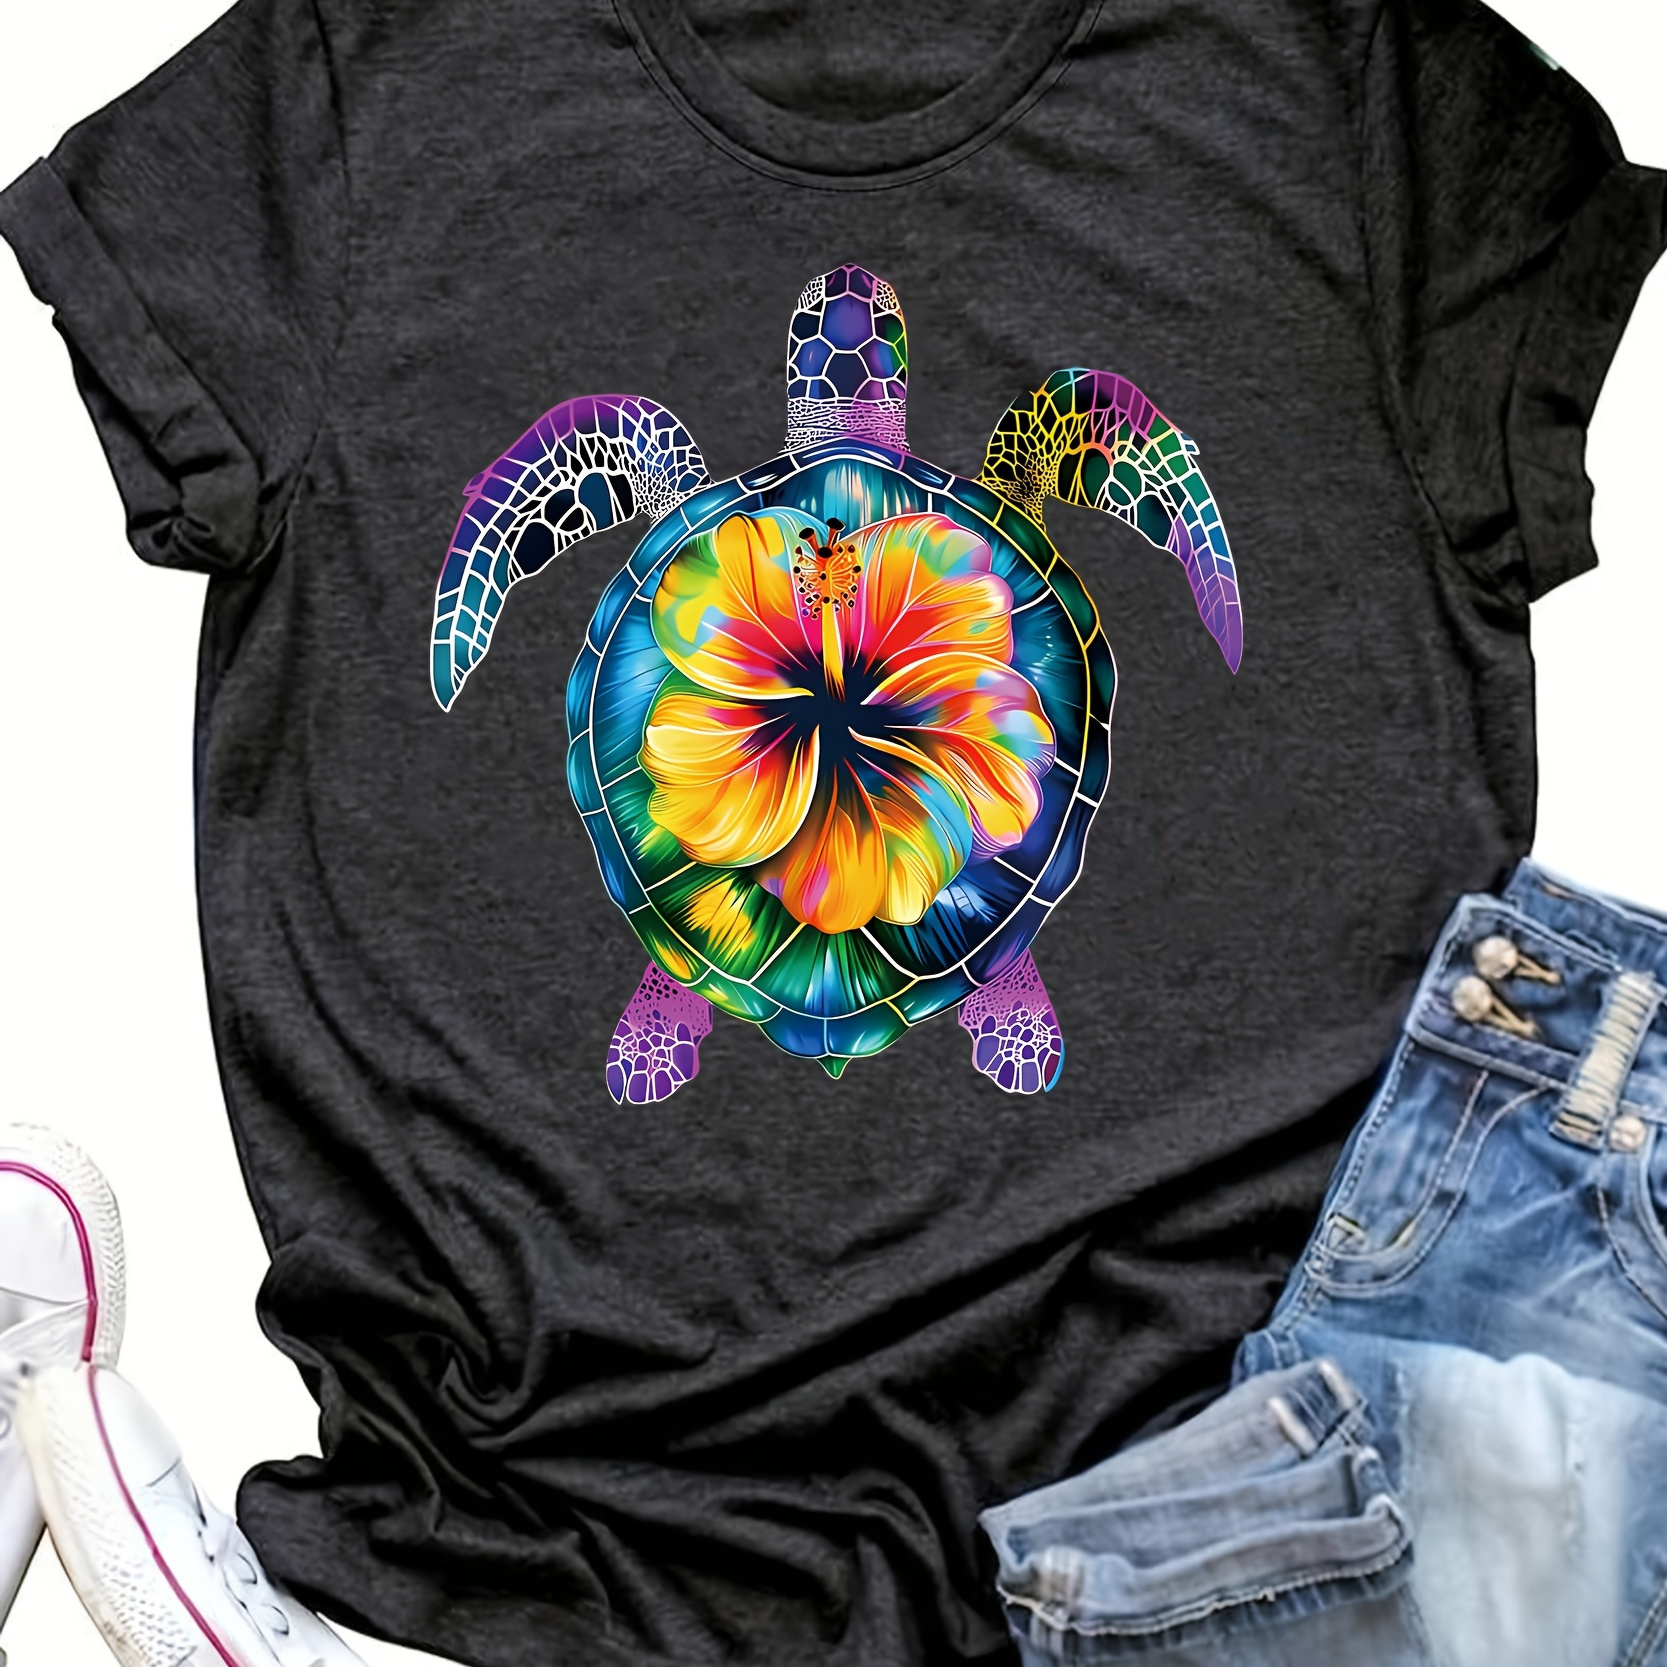 

Turtle Print Short Sleeve T-shirt, Casual Crew Neck Top For Spring & Summer, Women's Clothing